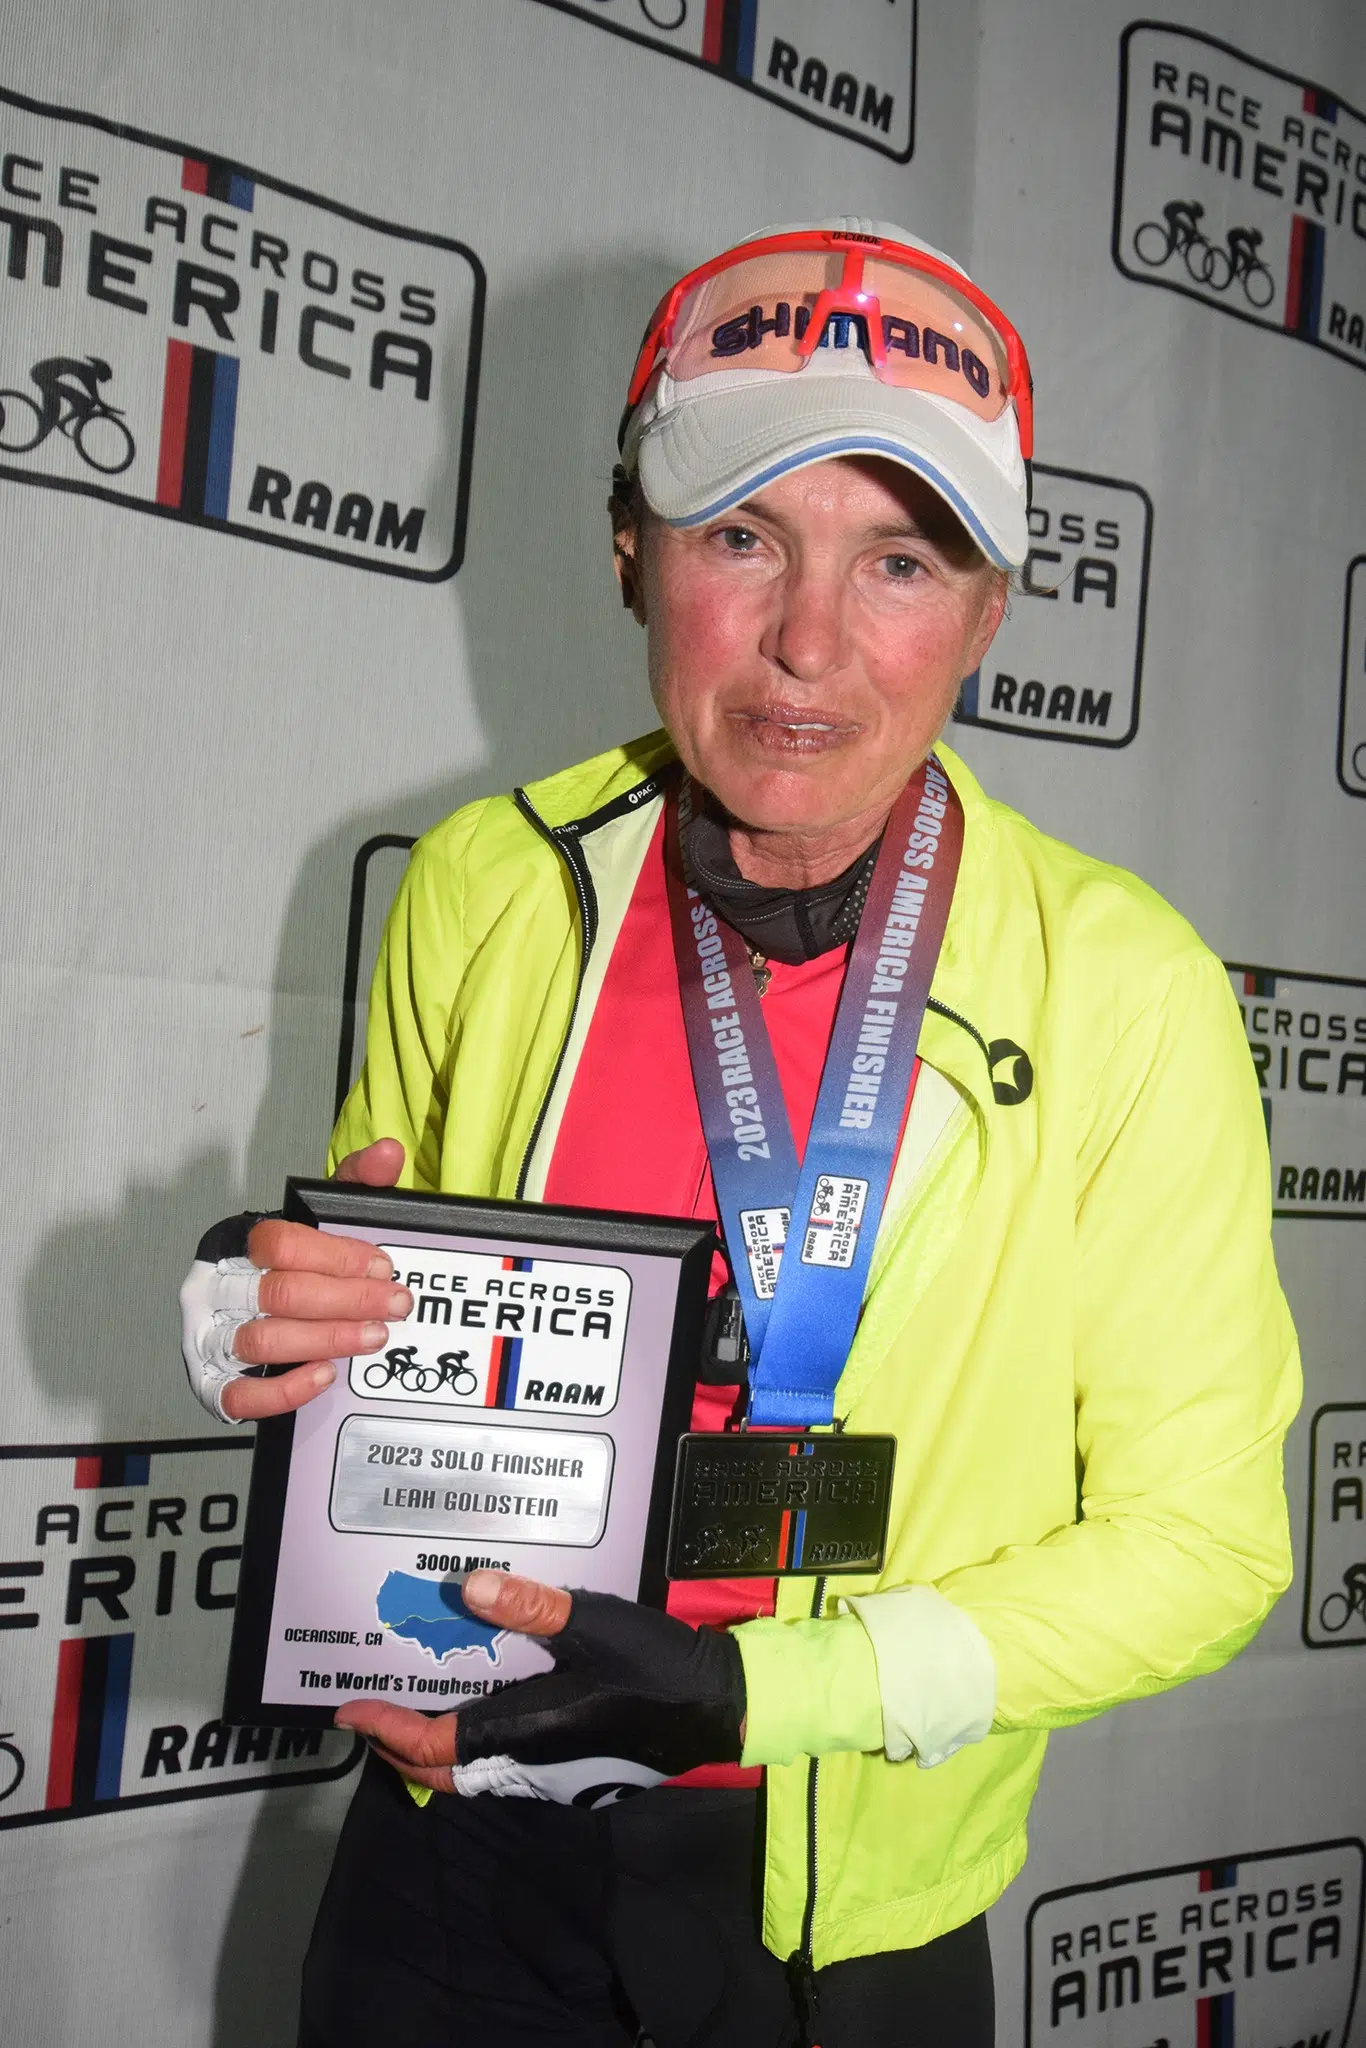 Vernon athlete completes grueling Race Across America in 10 days